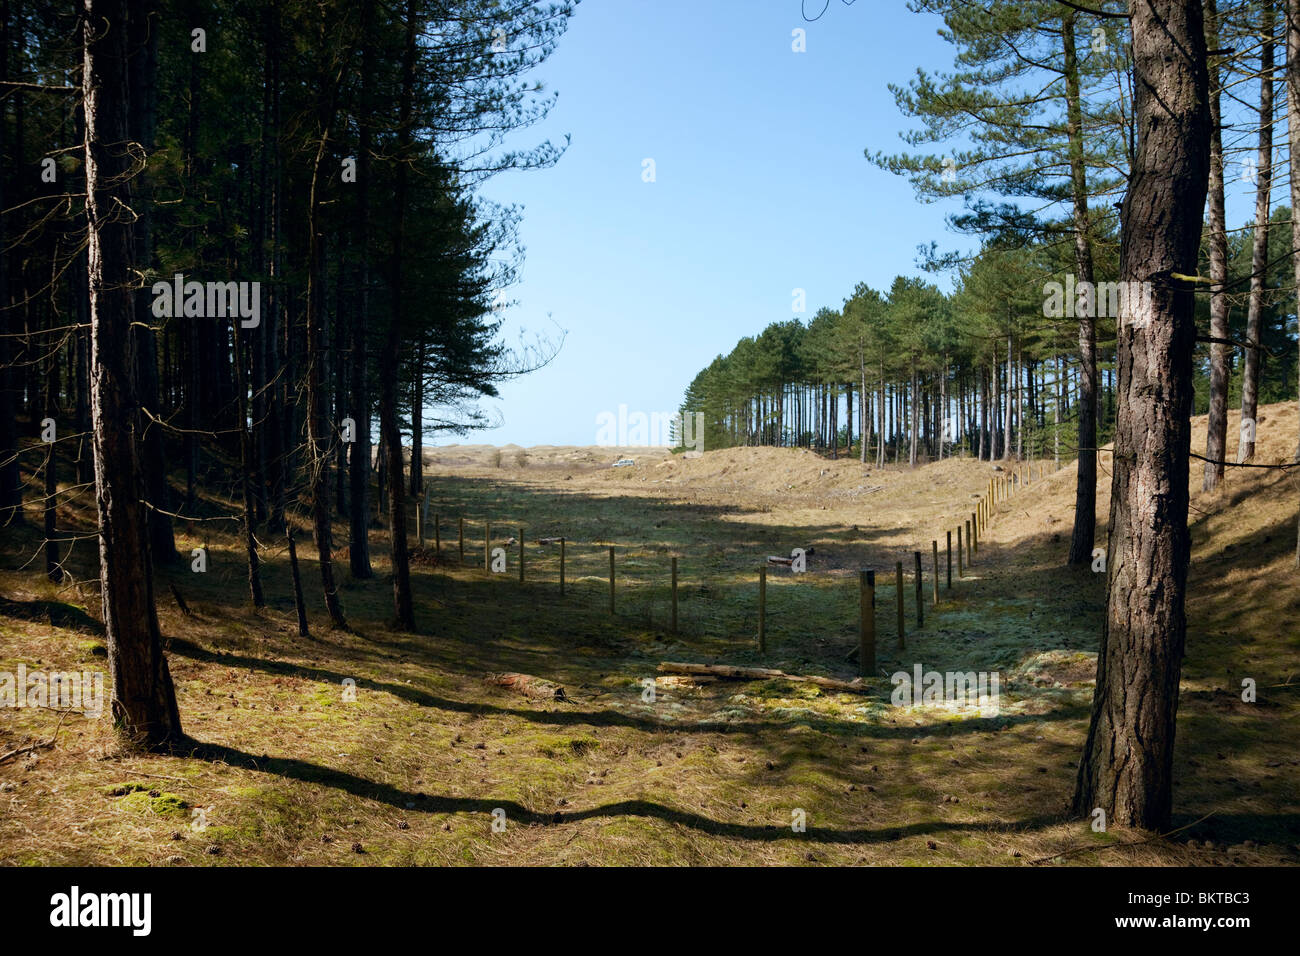 Ainsdale Sand Dunes National Nature Reserve Stock Photo